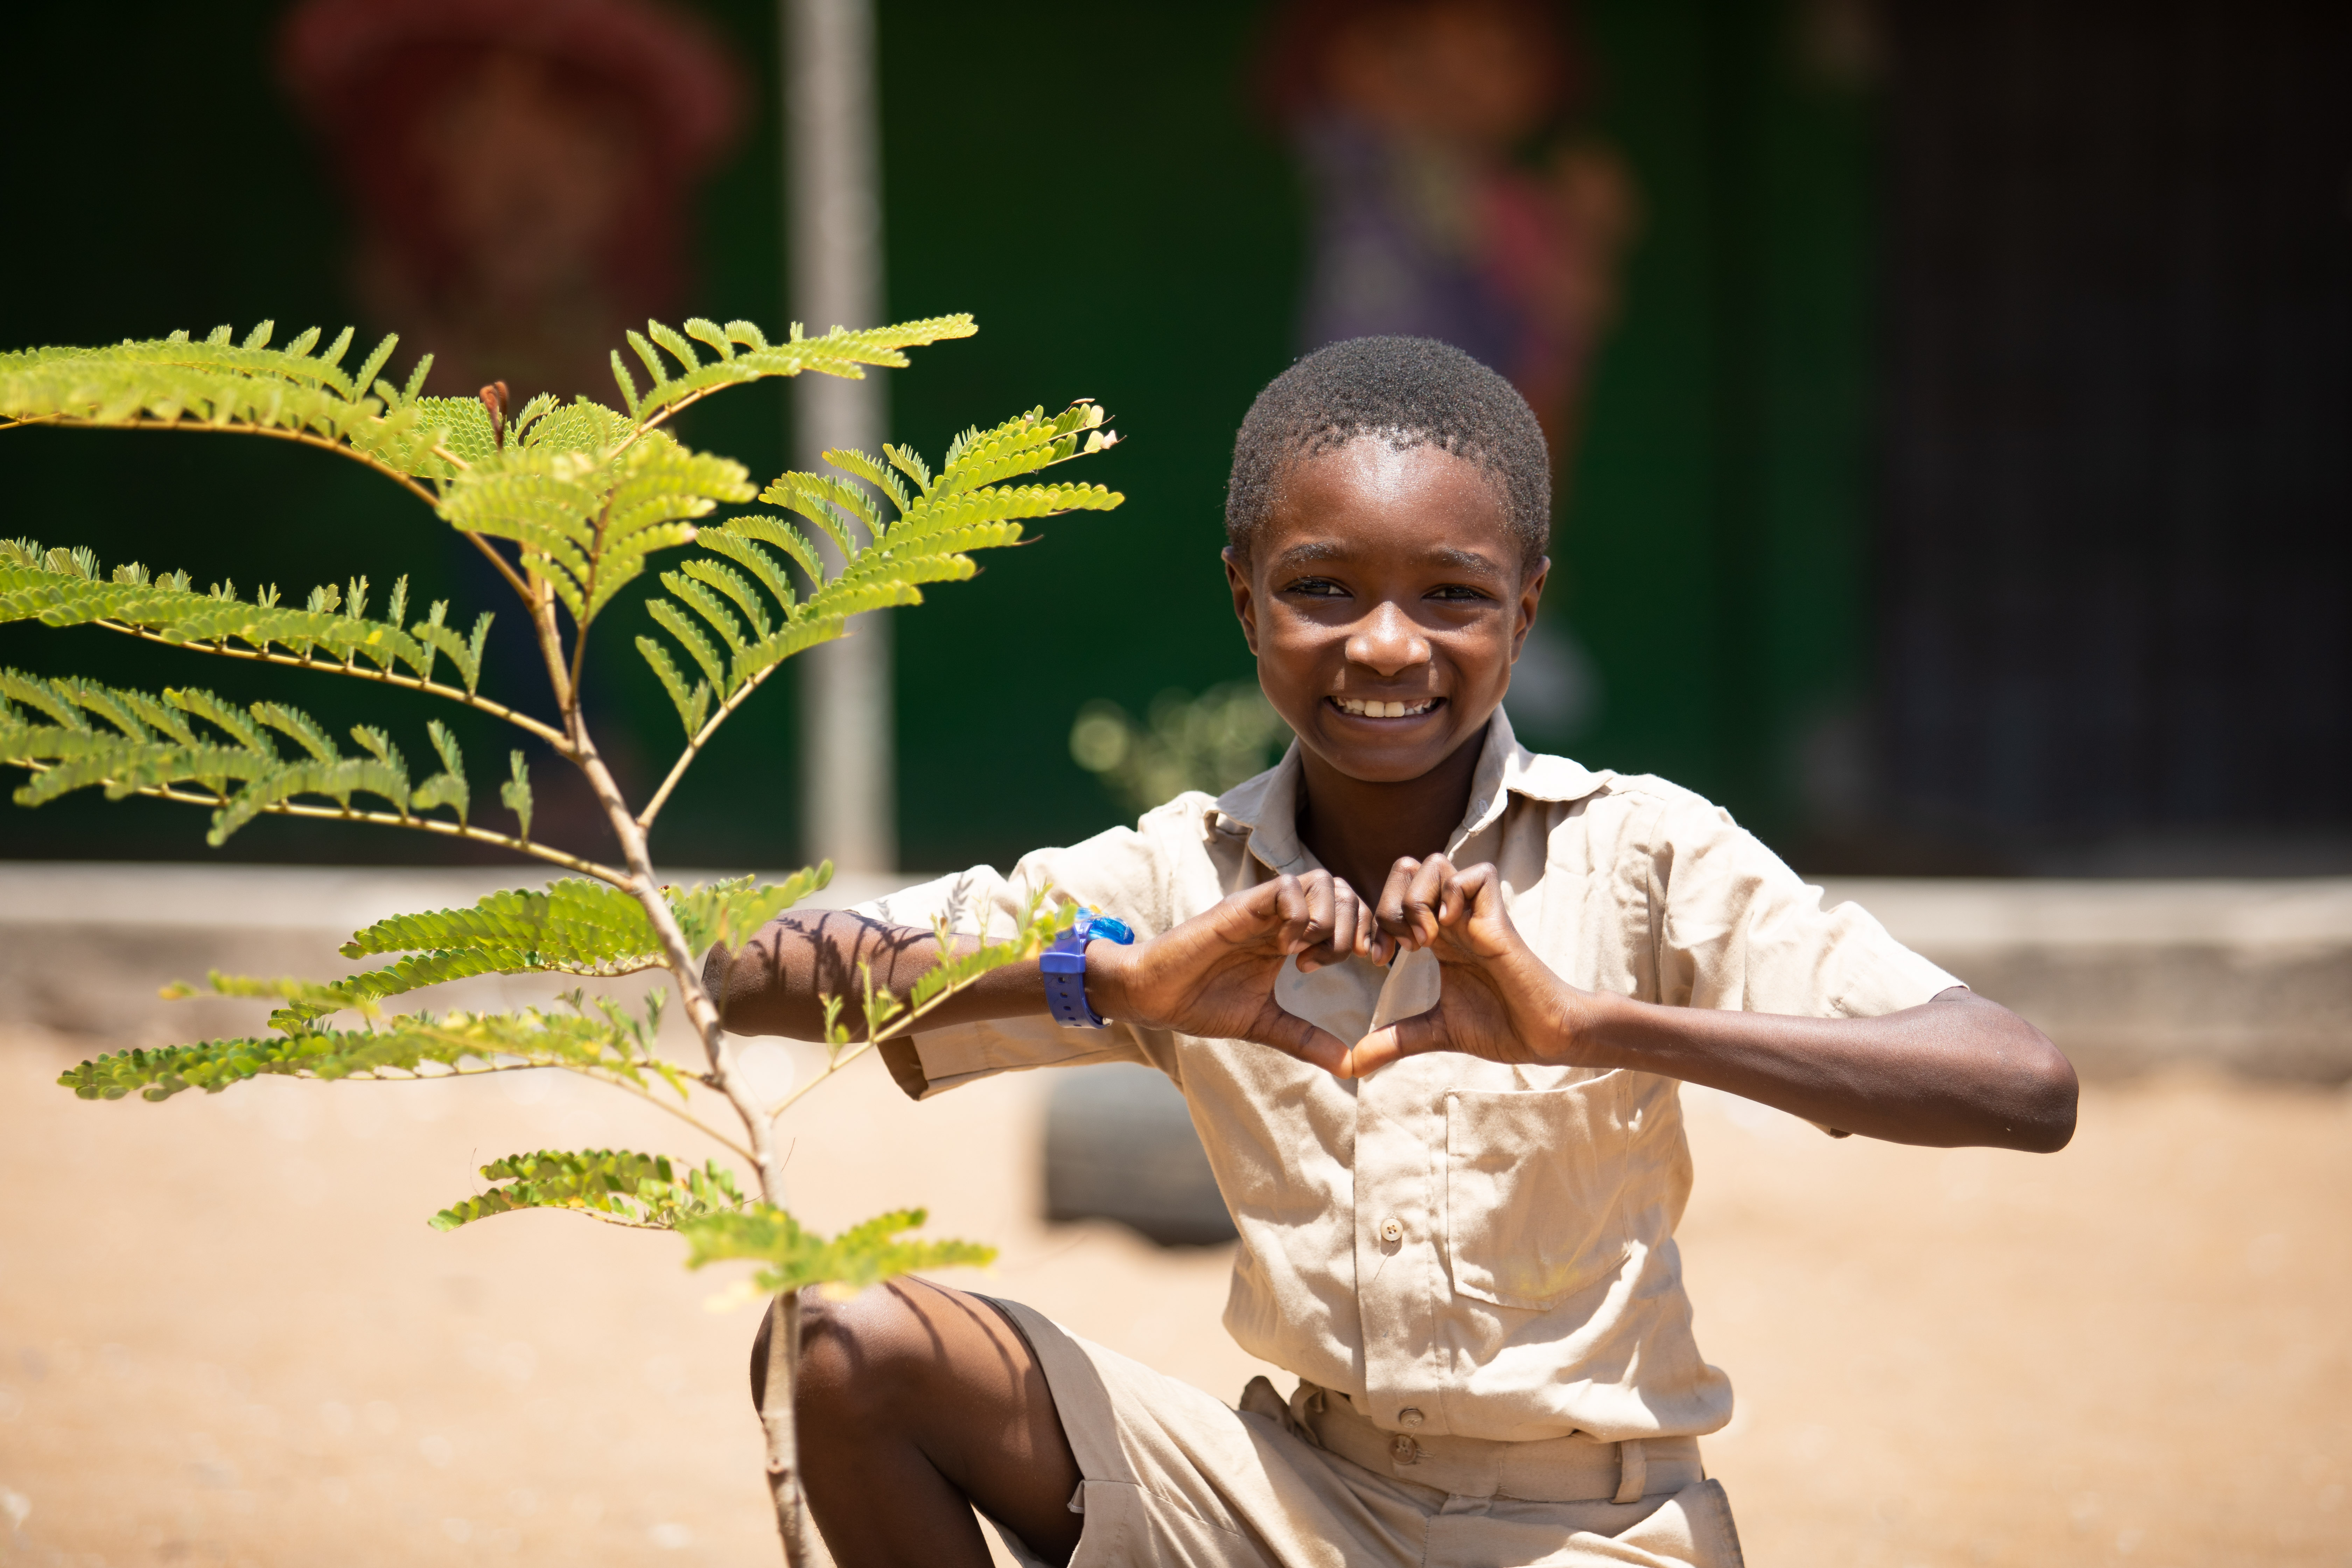 On 20 May 2020, a boy makes a heart symbol with his hands during Green School activities in Gonzagueville, a suburban of Abidjan, in the South of Côte d’Ivoire.  Children received environmental advice. They planted and watered trees and seeds, learned how to wash their hands properly.  Green schools have been implemented by UNICEF and young champions to ensure that every child can learn in a clean and healthy environment.  For every child, the right to a clean environment.